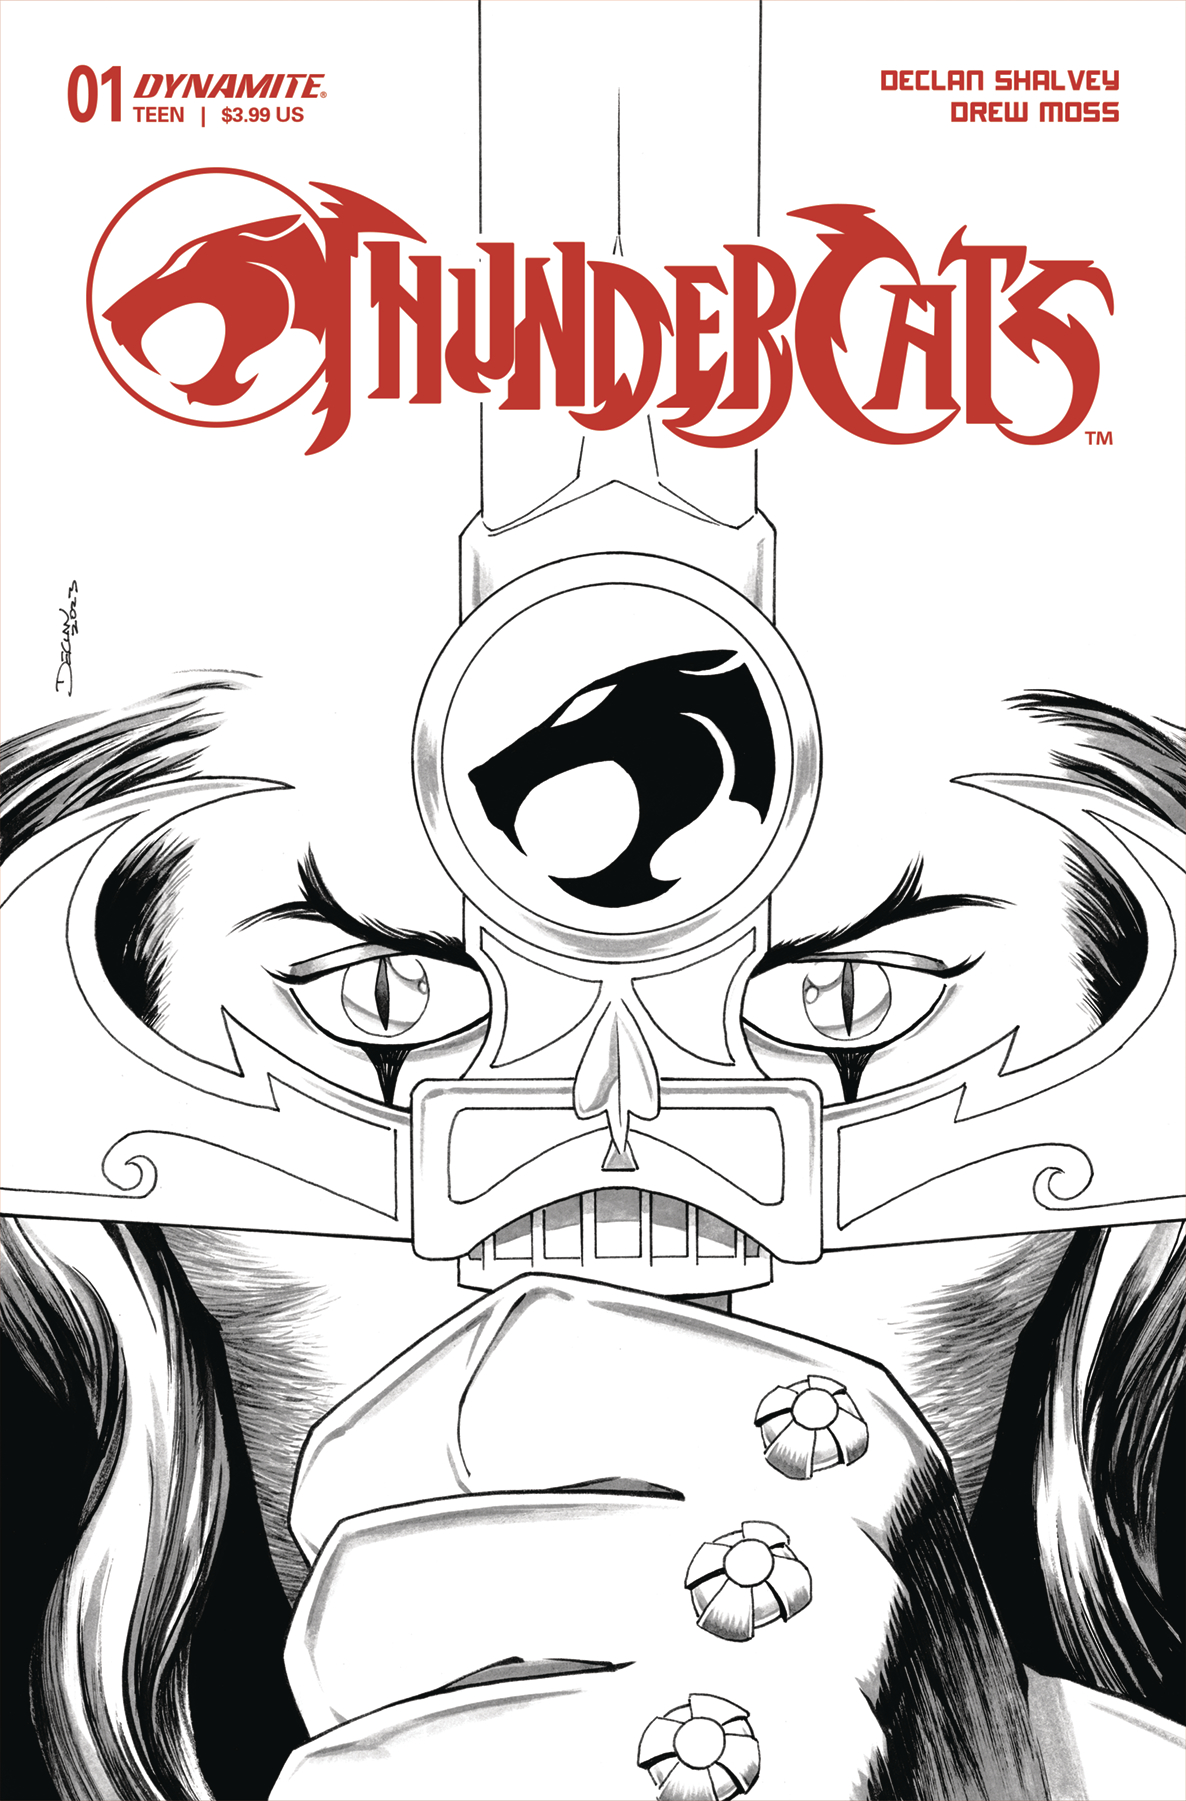 Thundercats #1 Cover Q 1 for 10 Incentive Shalvey Line Art